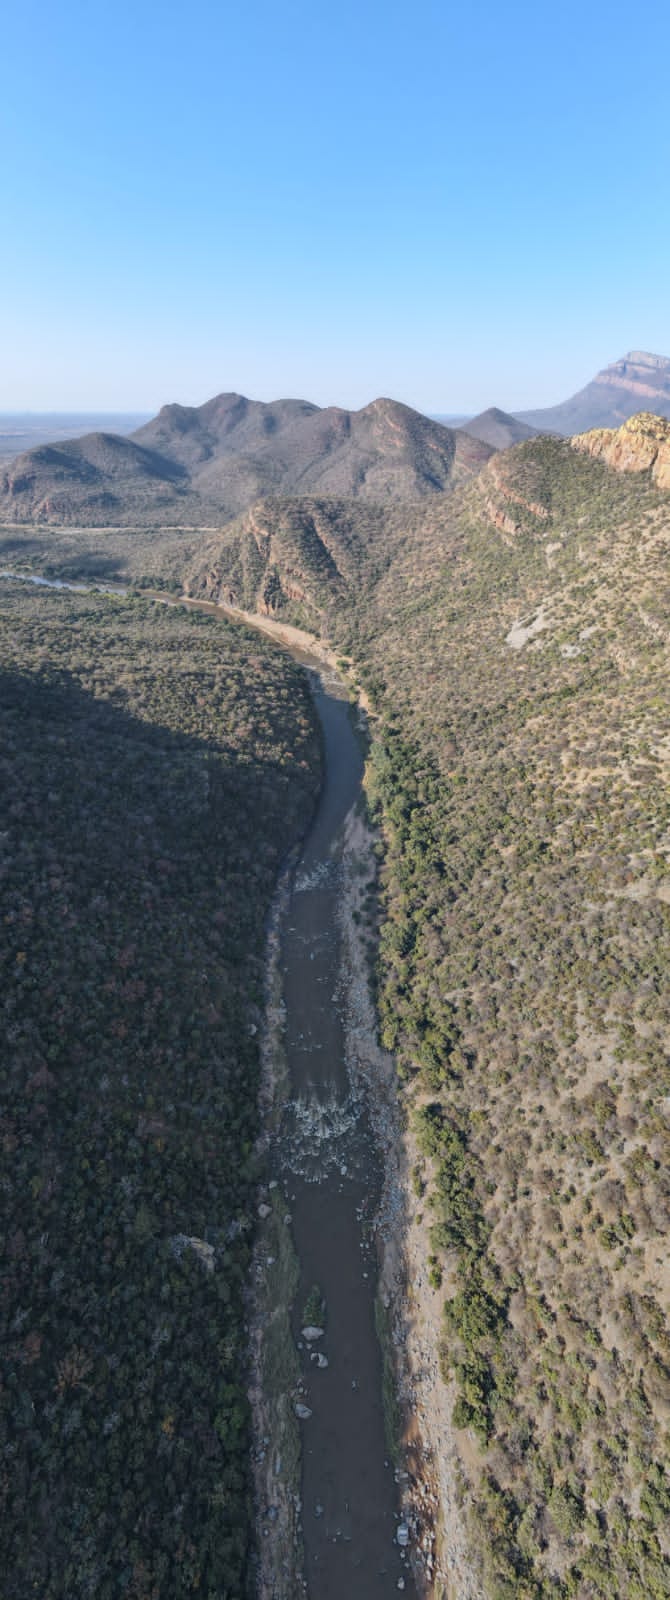 A drone shot of the Olifant Gorge in the Limpopo Province of South Africa